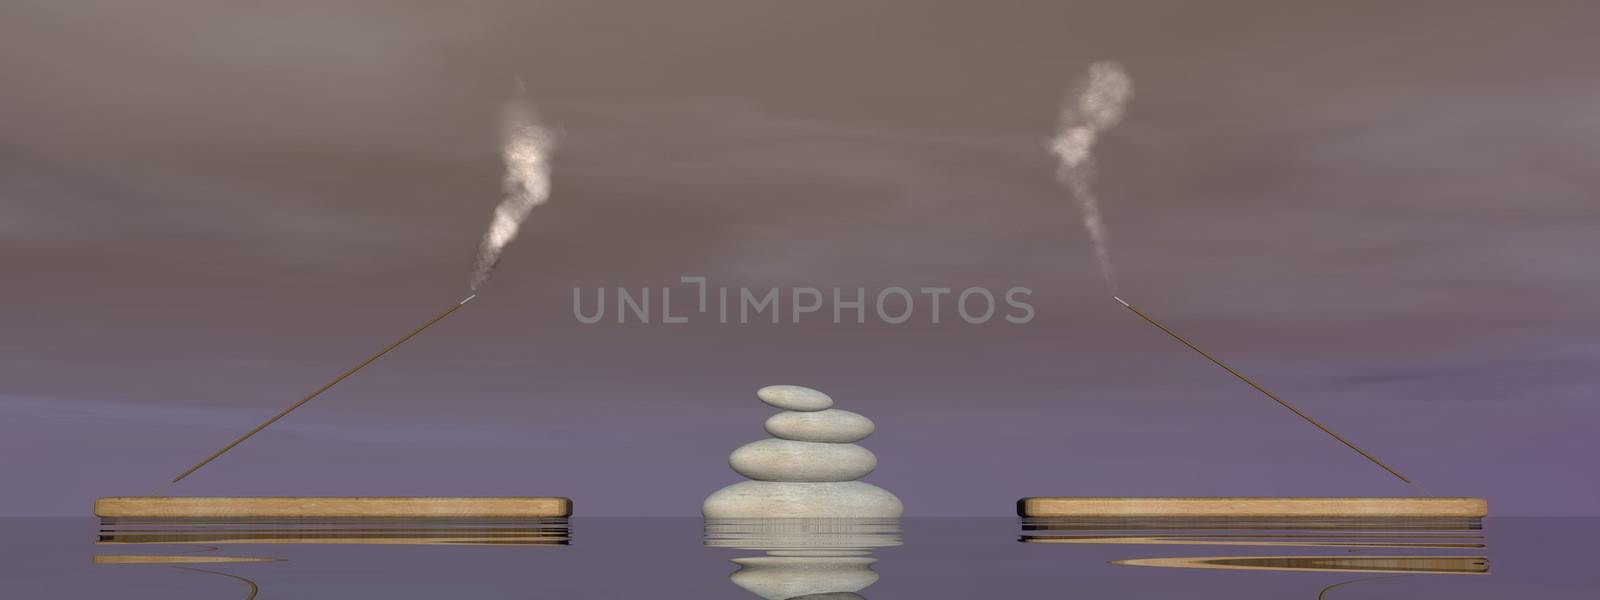 Balanced white stones between two incense sticks with smoke upon water in brown background